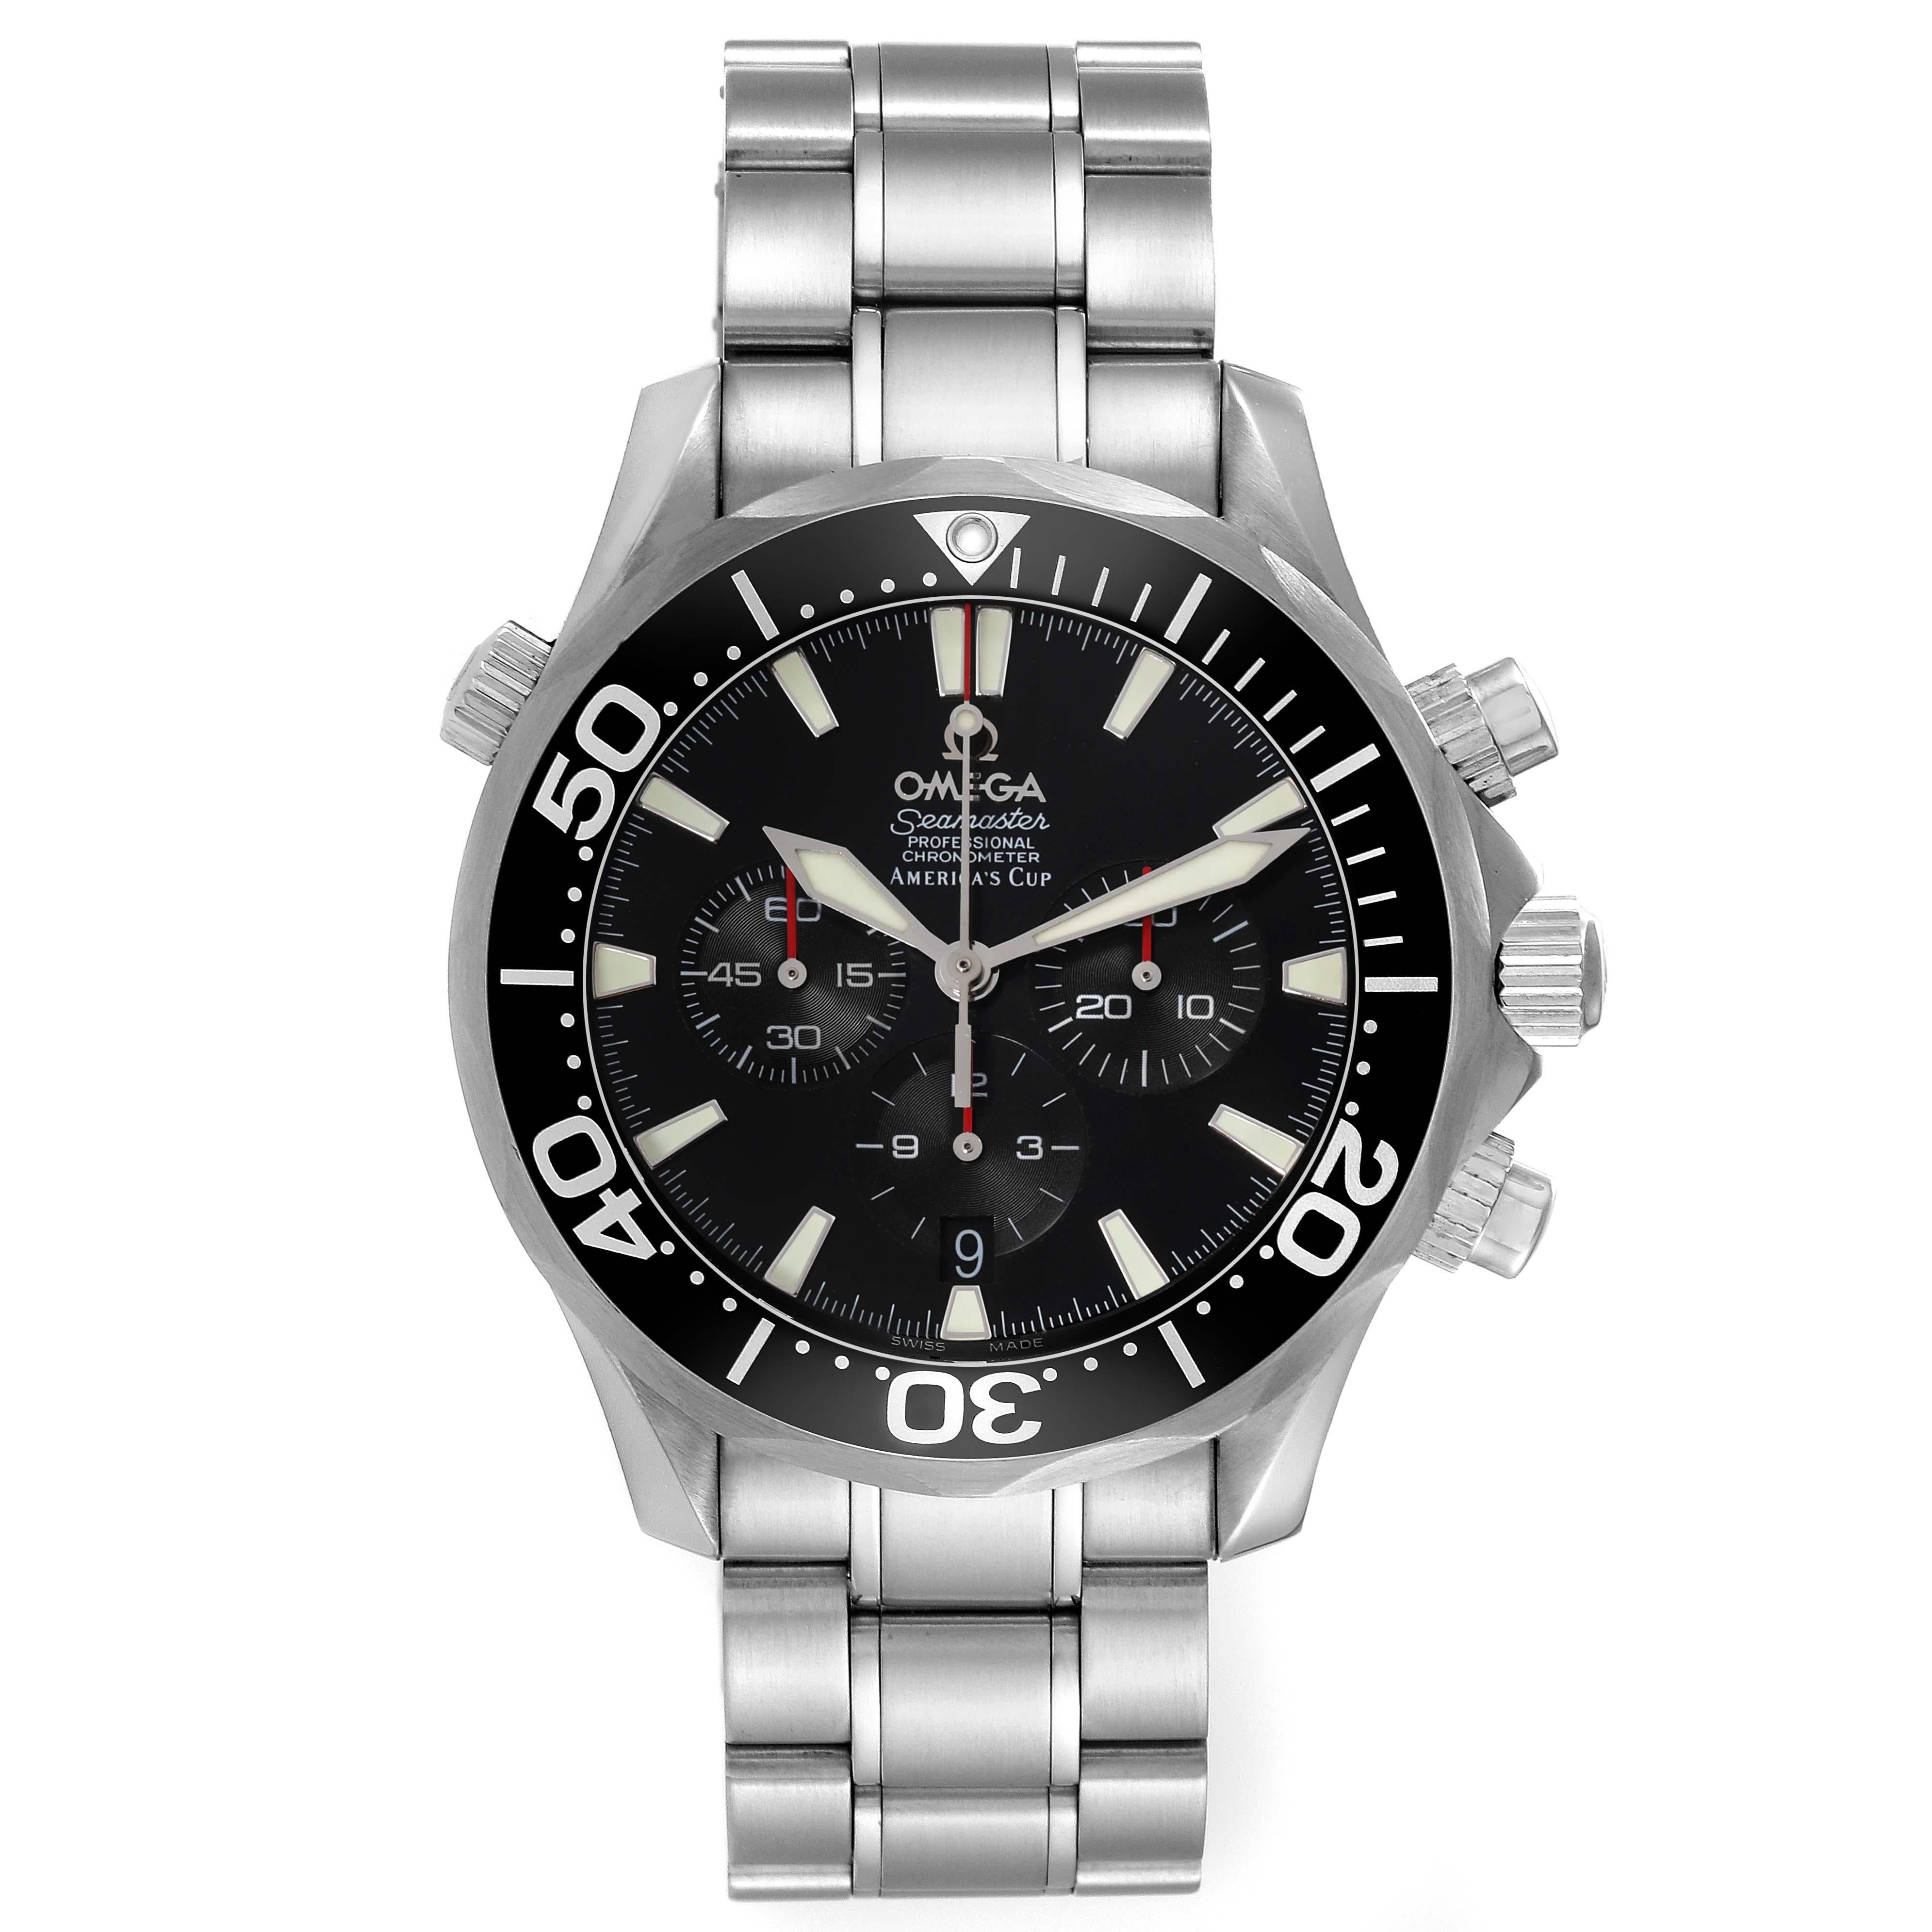 Omega Seamaster 300M Chronograph Americas Cup Mens Watch 2594.50.00. Officially certified chronometer automatic self-winding chronograph movement with column-wheel mechanism. Caliber 3303. Stainless steel case 41.5 mm in diameter. Omega logo on the